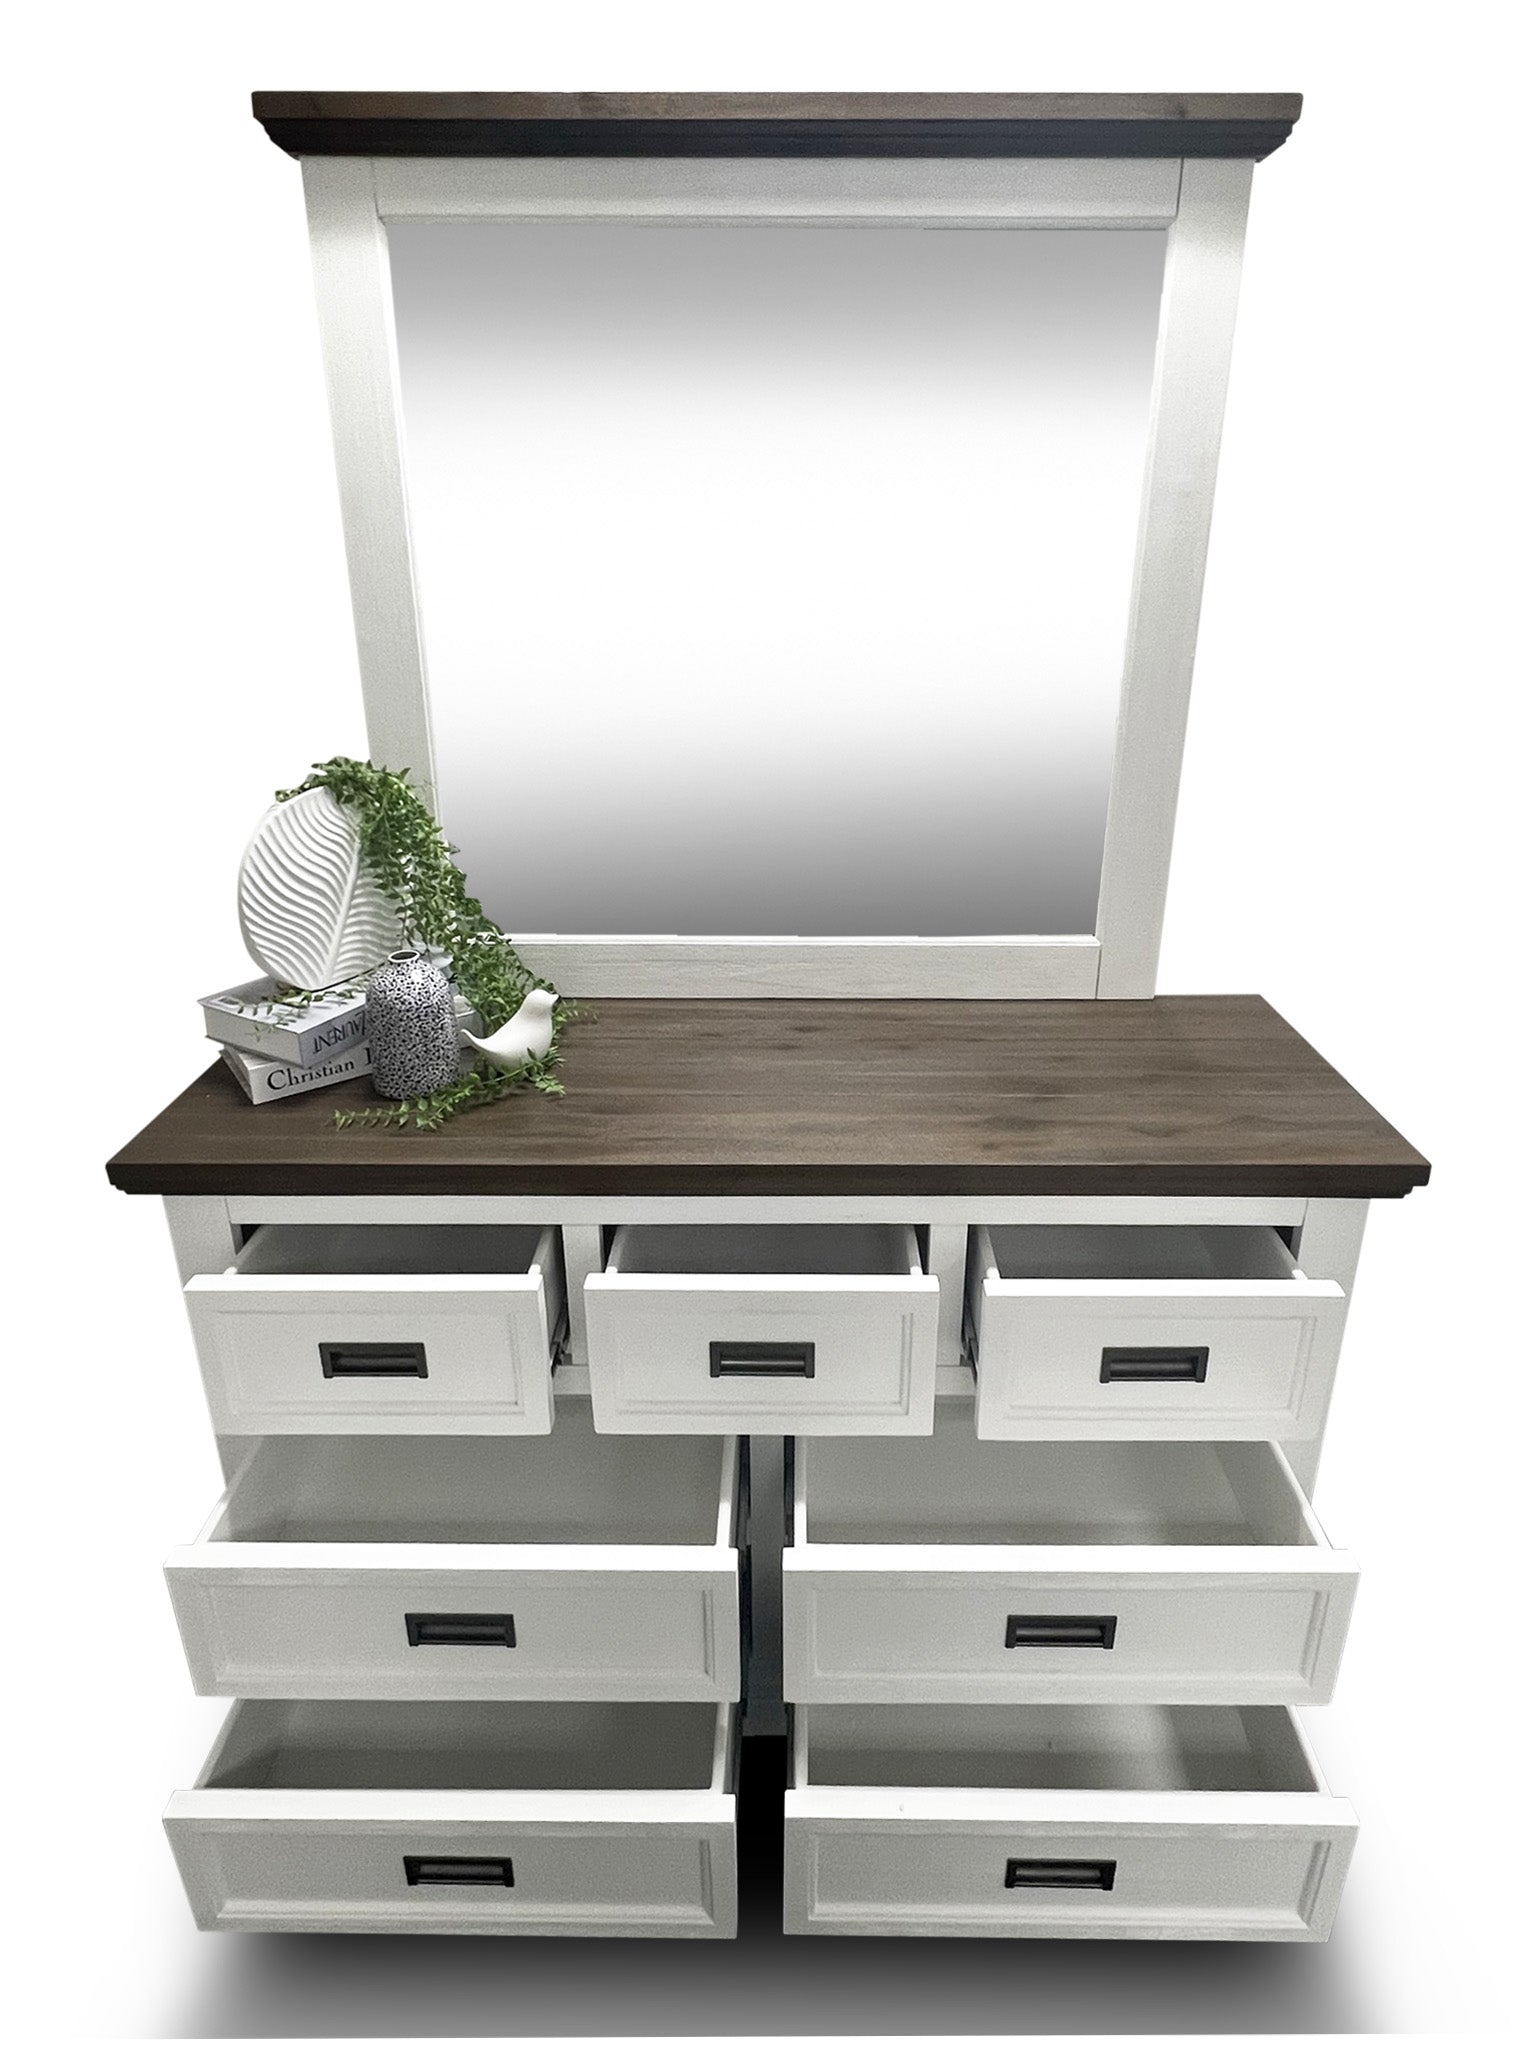 Hamptons 4 Piece King Bedroom Package With Dressing Table